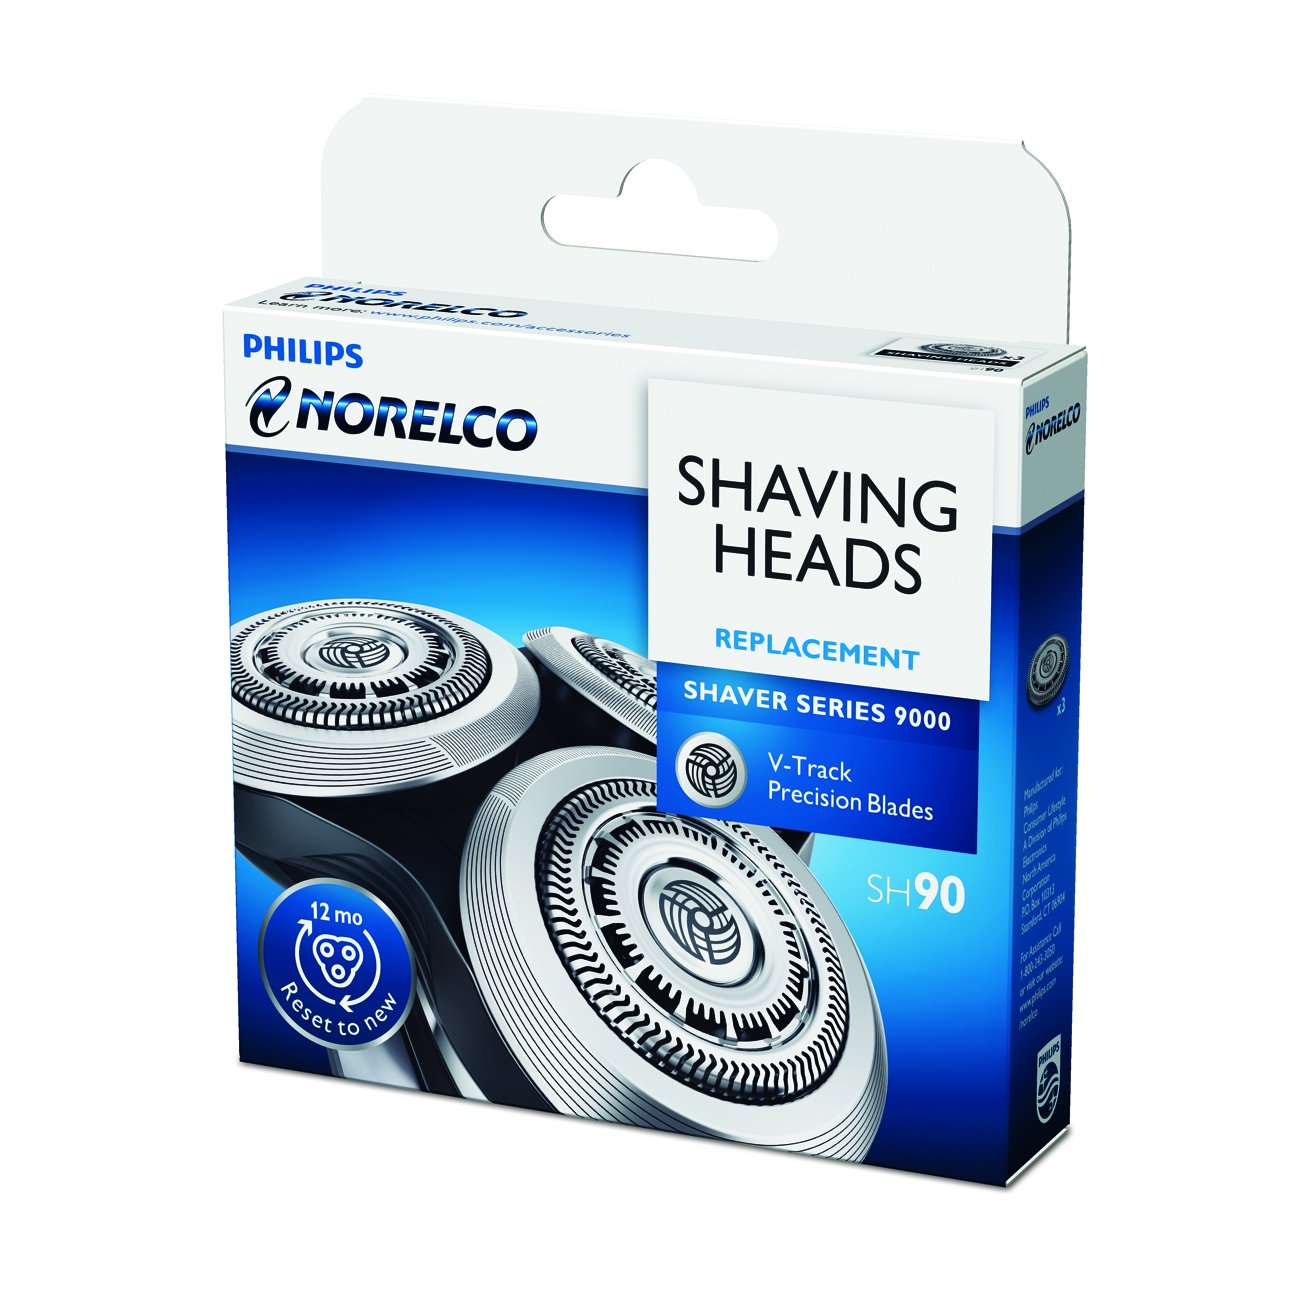 Philips Norelco SH-90 Shavers Series 9000 Replacement Head